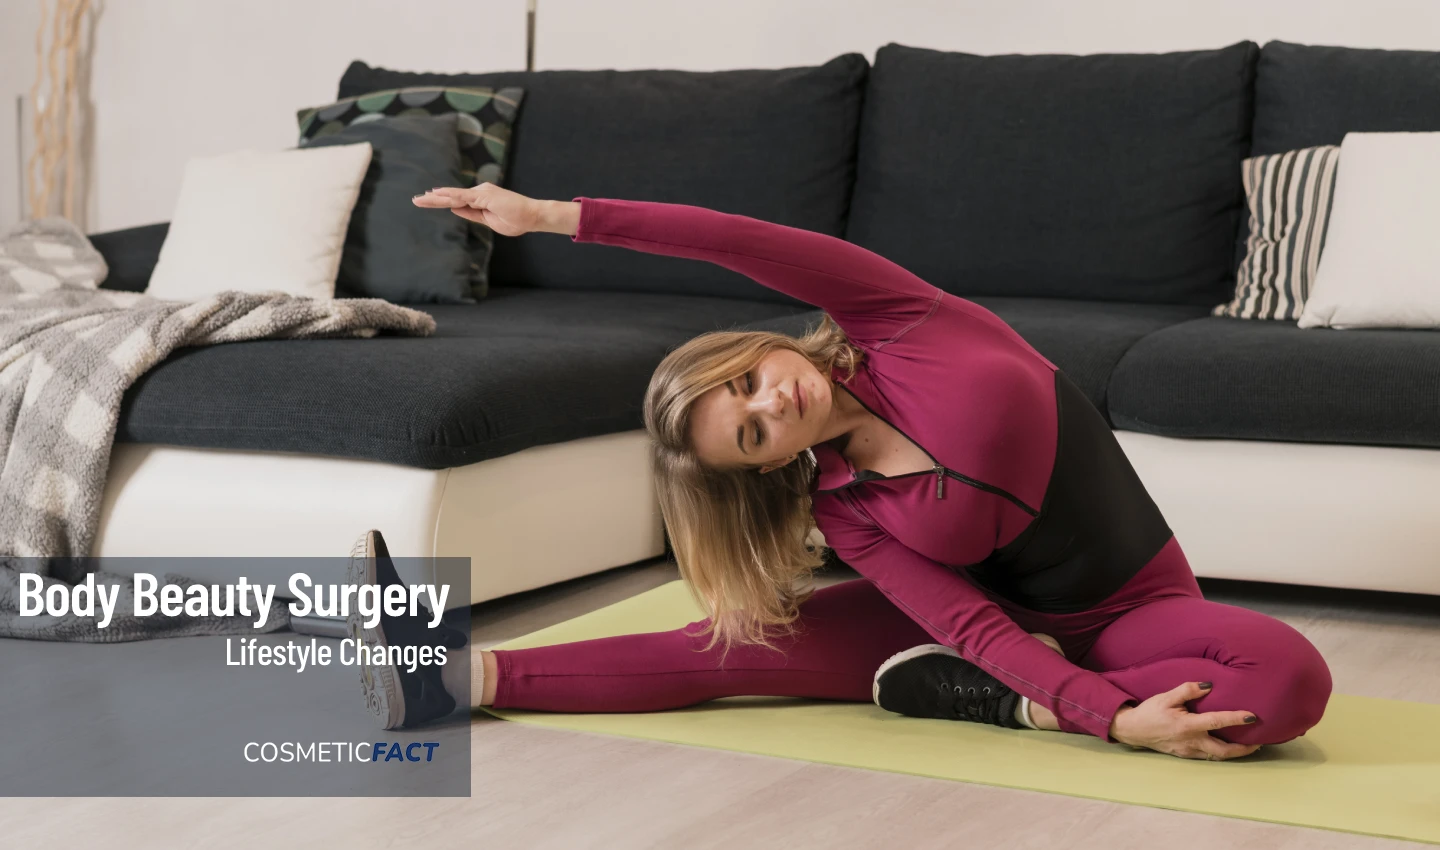 Image of a woman performing yoga poses as part of her routine for maintaining her new body after surgery.